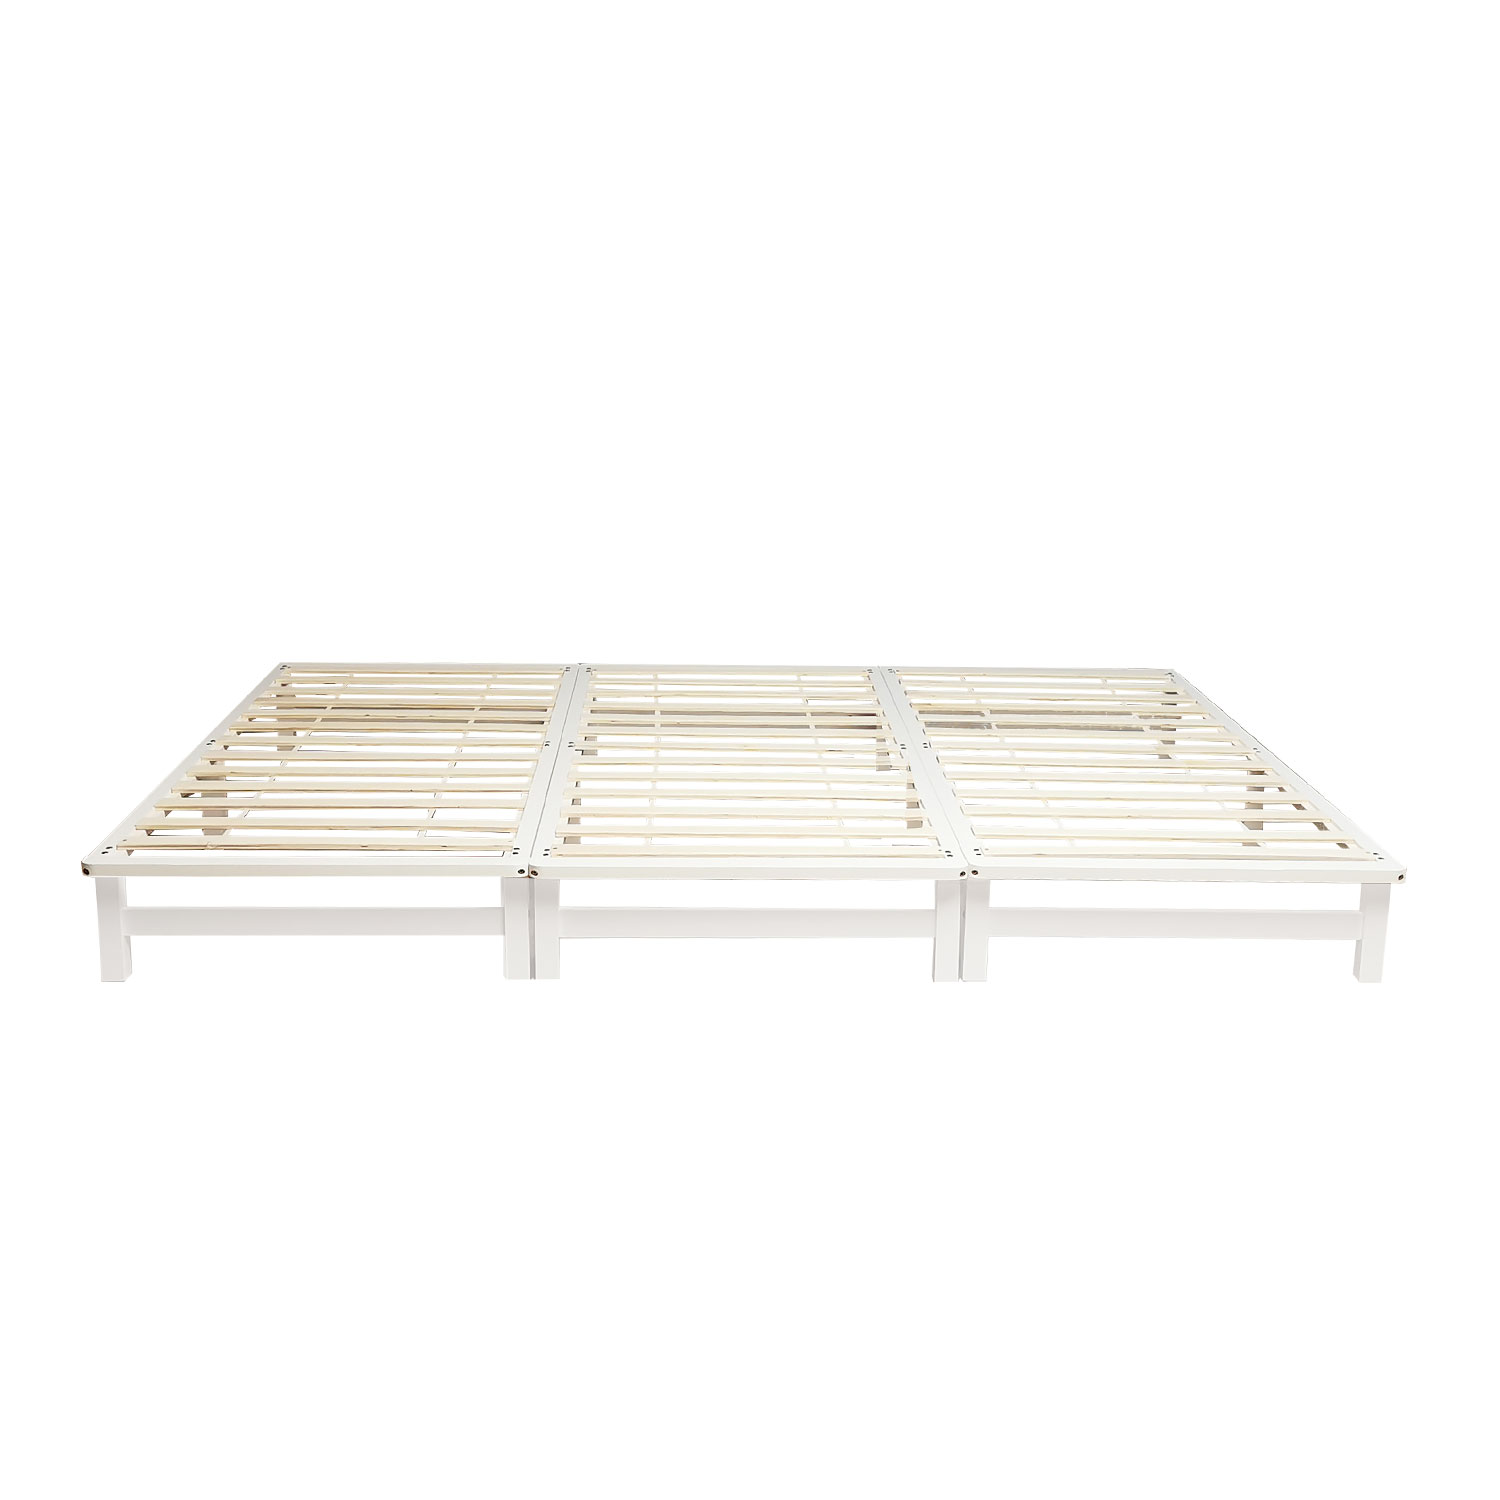 Family bed wooden bed pallet bed 270x200 cm Solid Frame Futon bed Pallet Furniture White